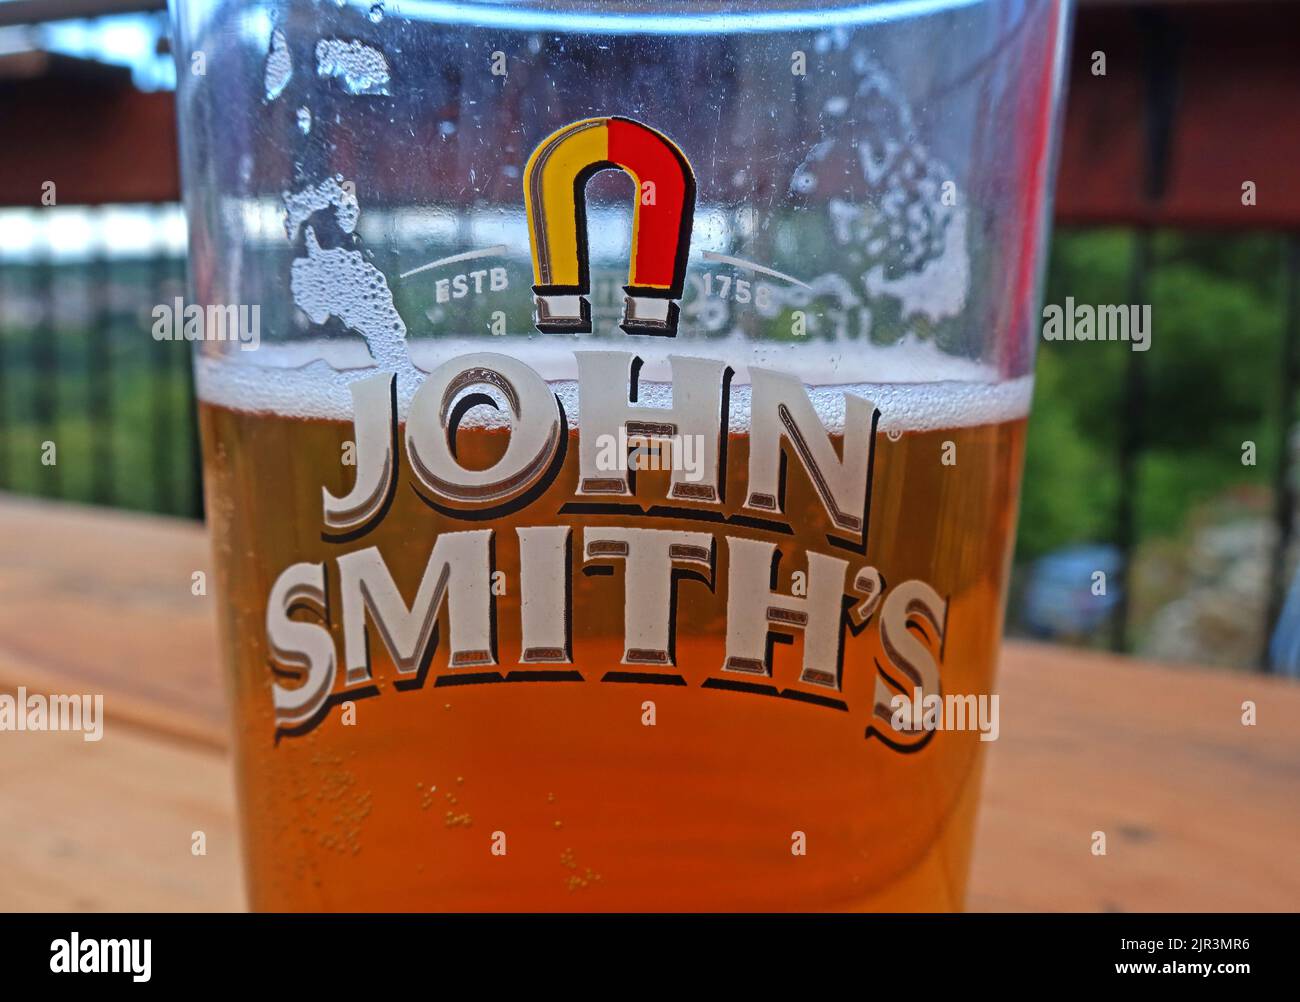 John Smiths, Magnet Ales, pint glass, ESTB 1758, half-full of beer, Llangollen, North Wales, UK - the highest selling bitter in the United Kingdom Stock Photo